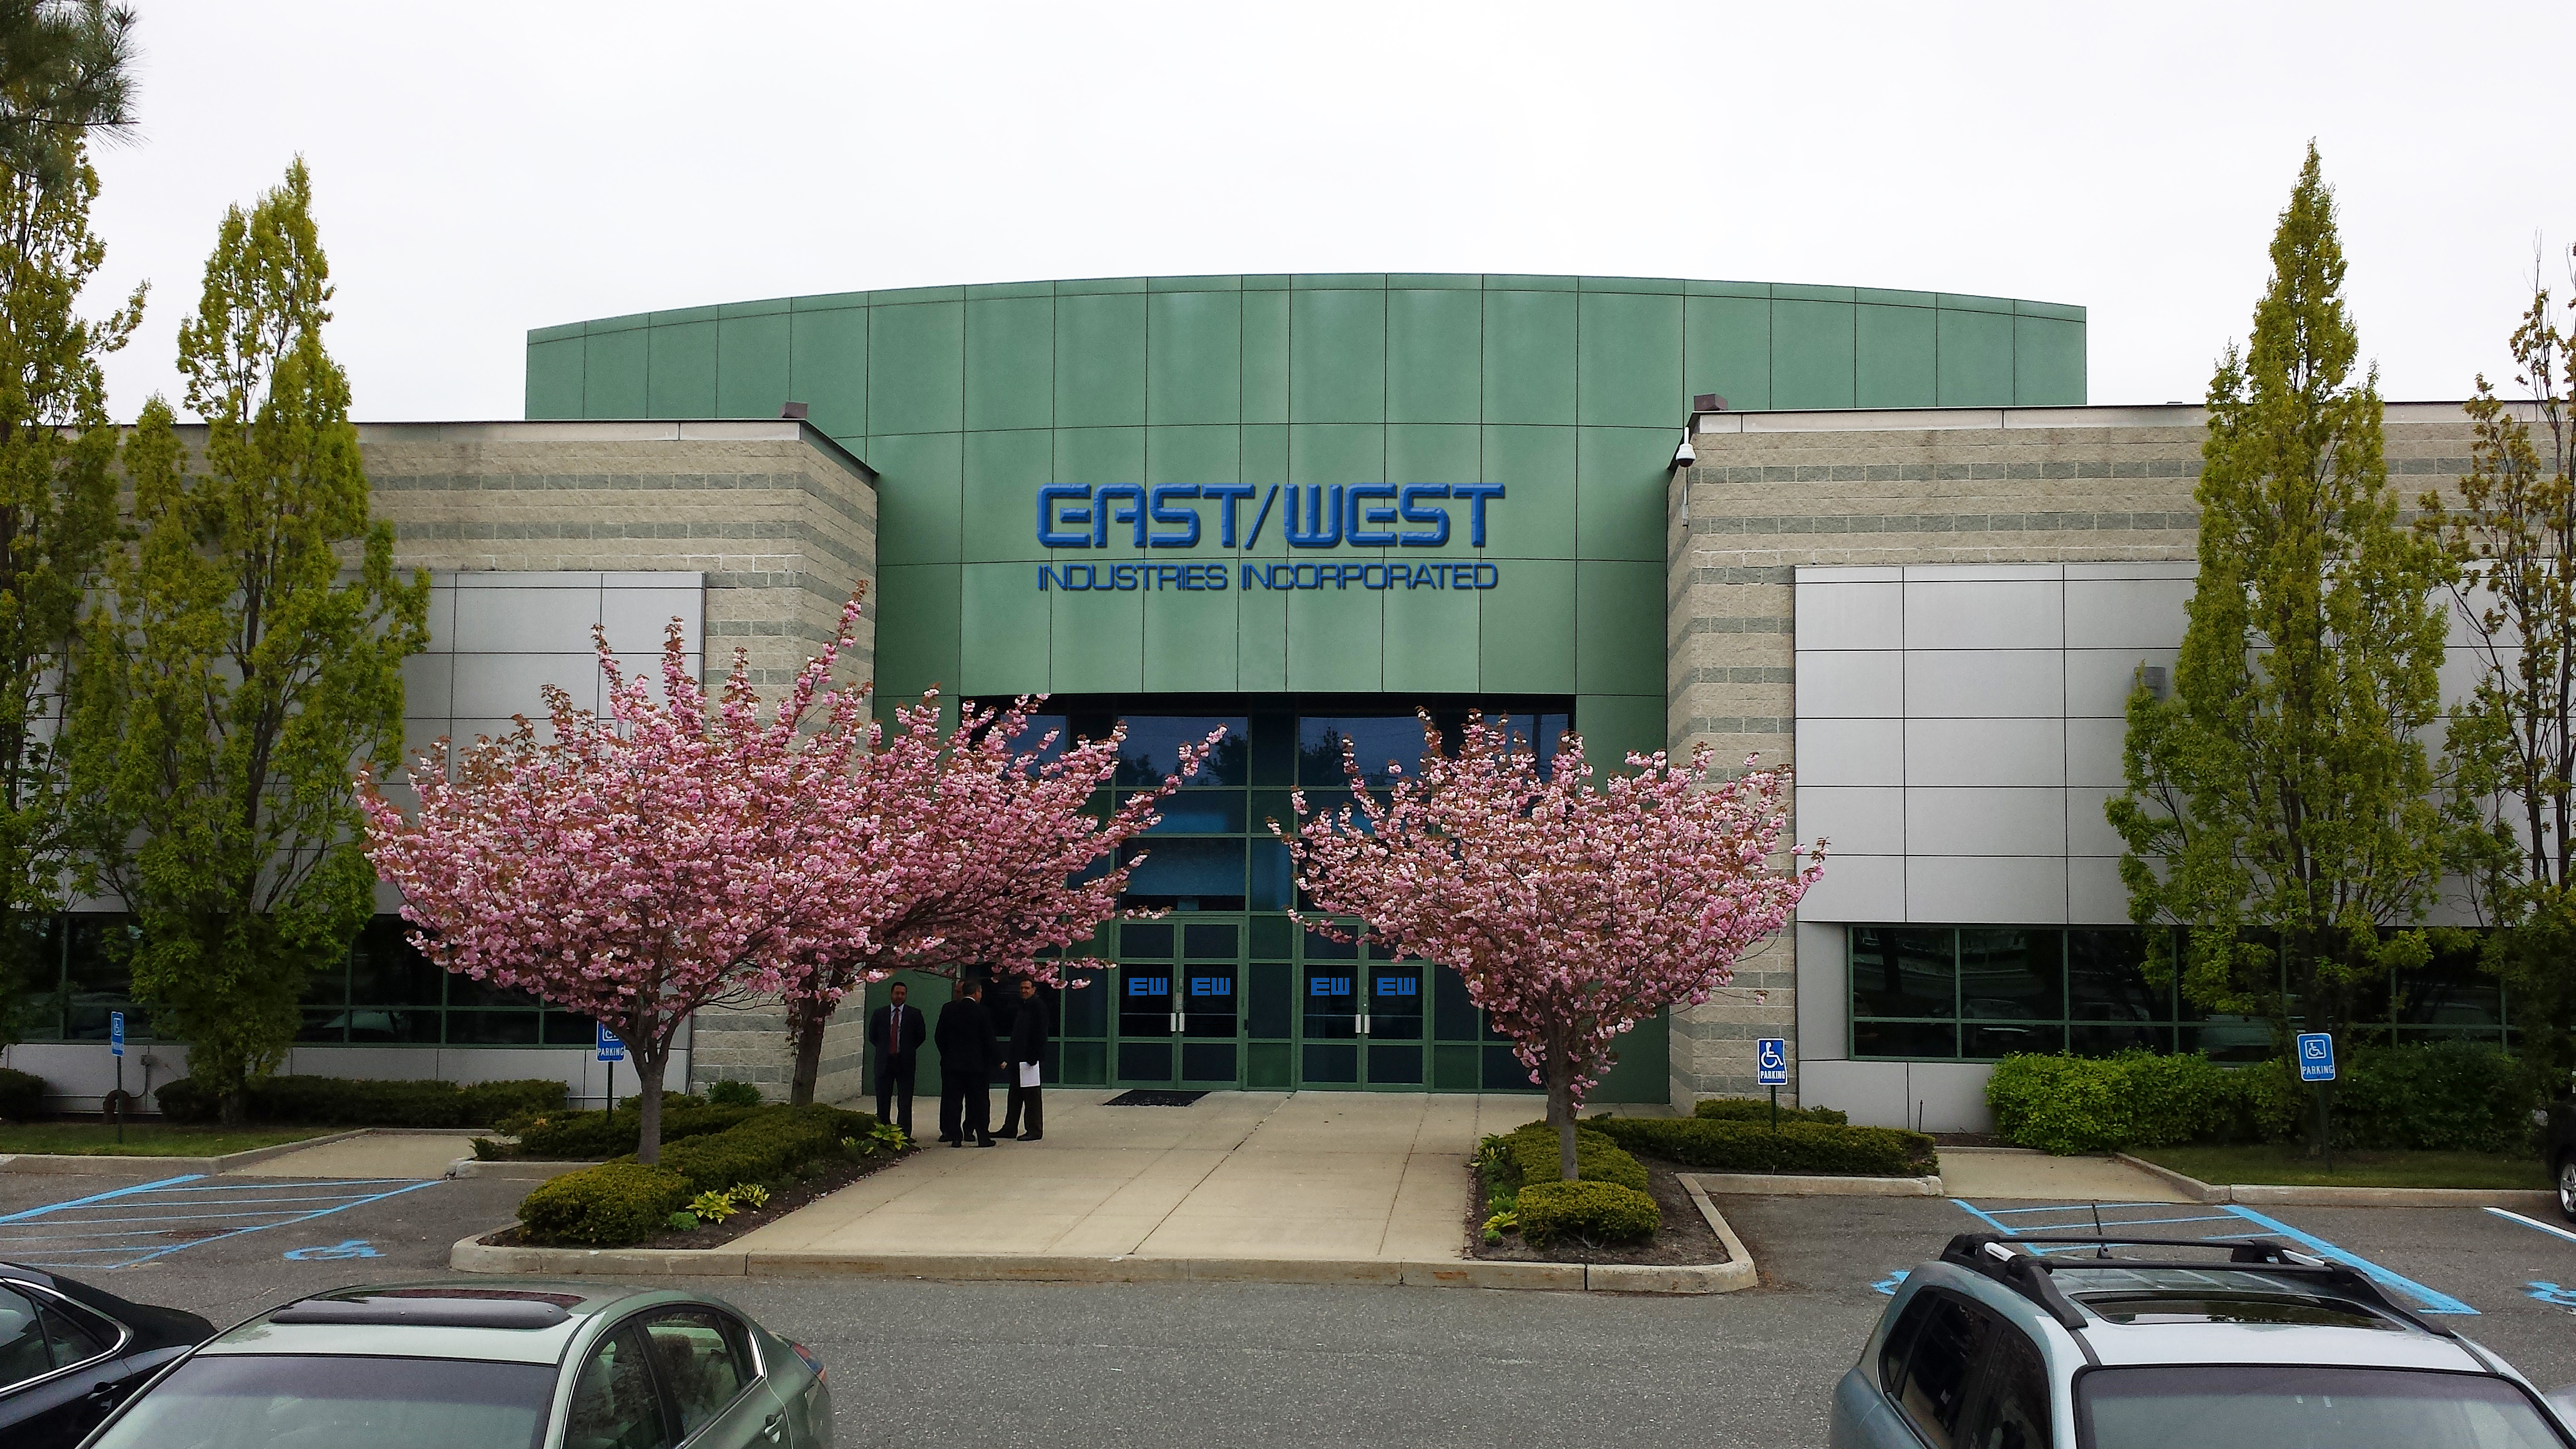 Outside view of new East/West Industries building